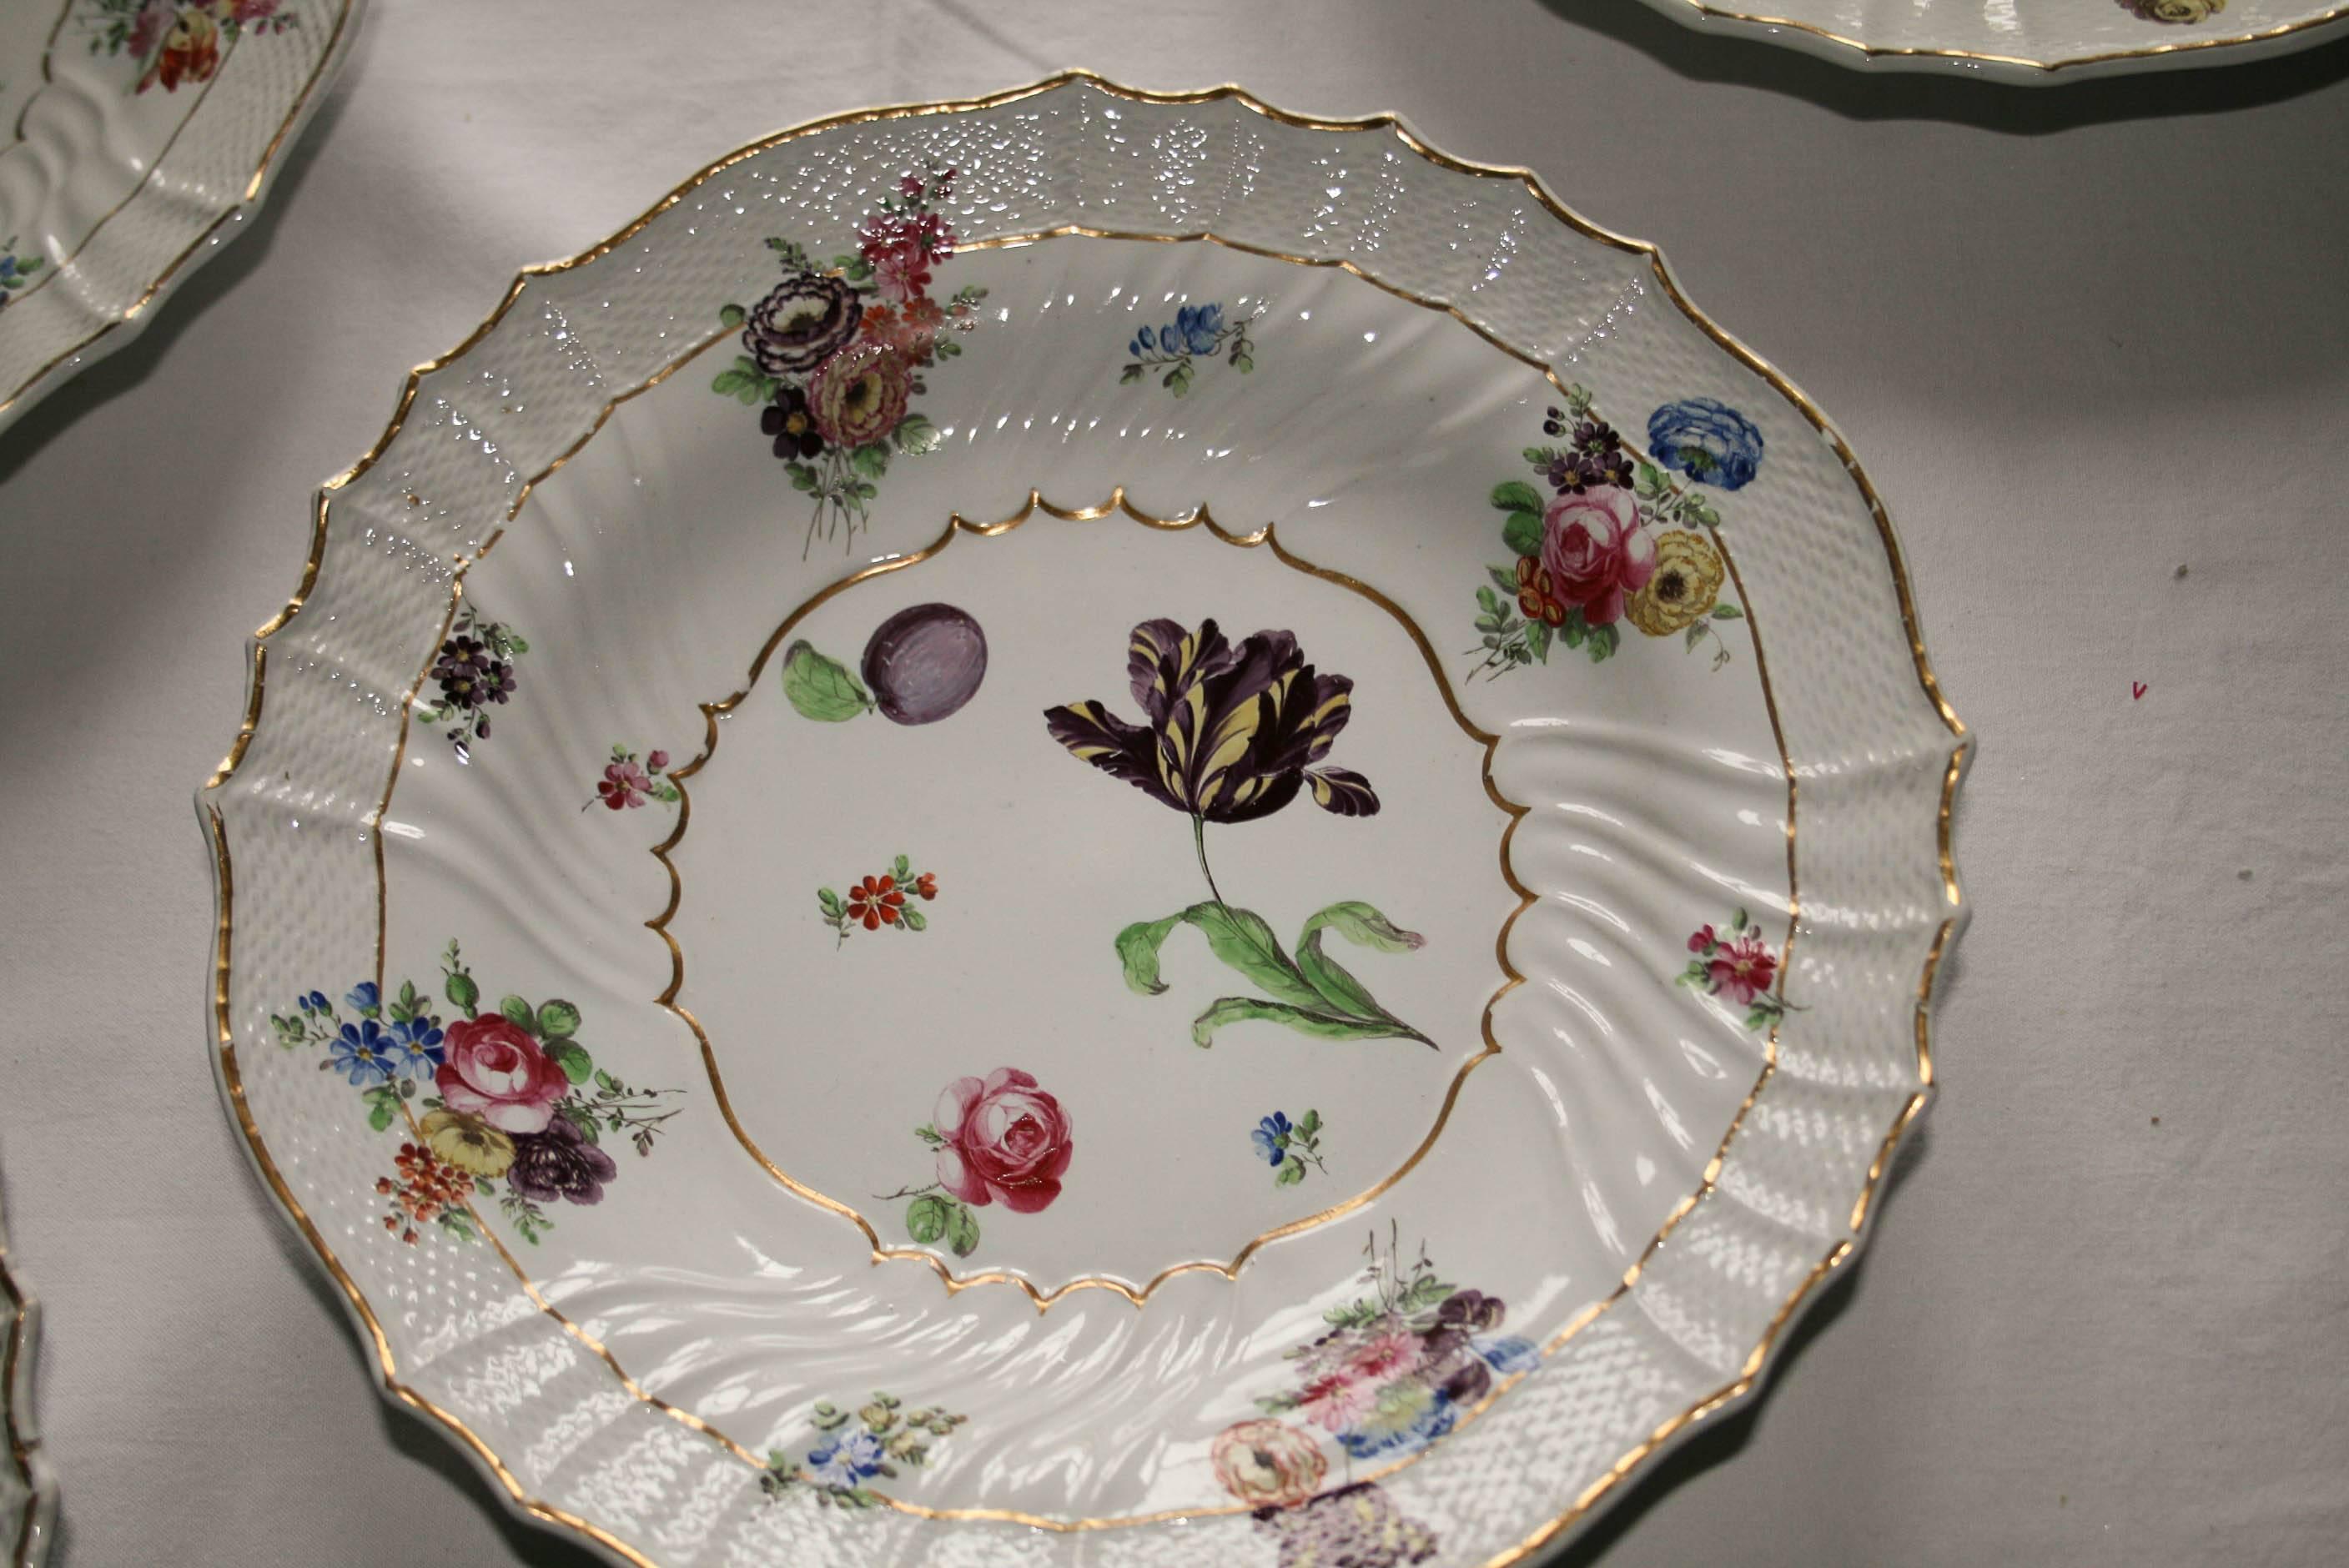 The set of eight hand-painted flower design porcelain dishes was manufactured by Richard Ginori in the historical headquarter of Doccia (Tuscany, Italy), one of the most important and famous producer in the Europe of 18th Century and today also.
The